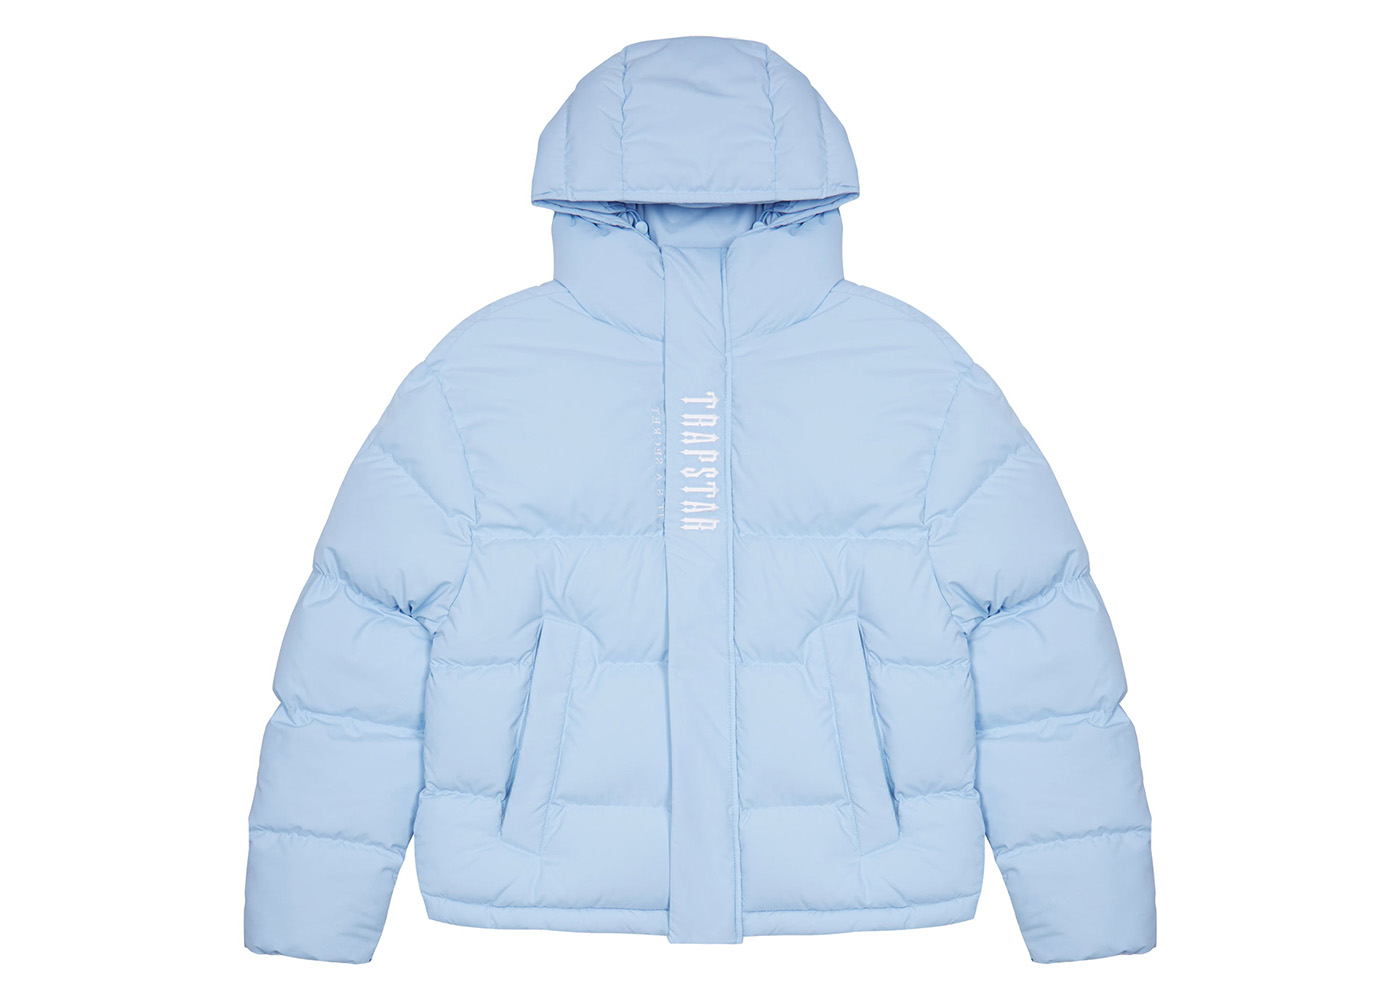 Trapstar Decoded Hooded Puffer 2.0 Ice Blue